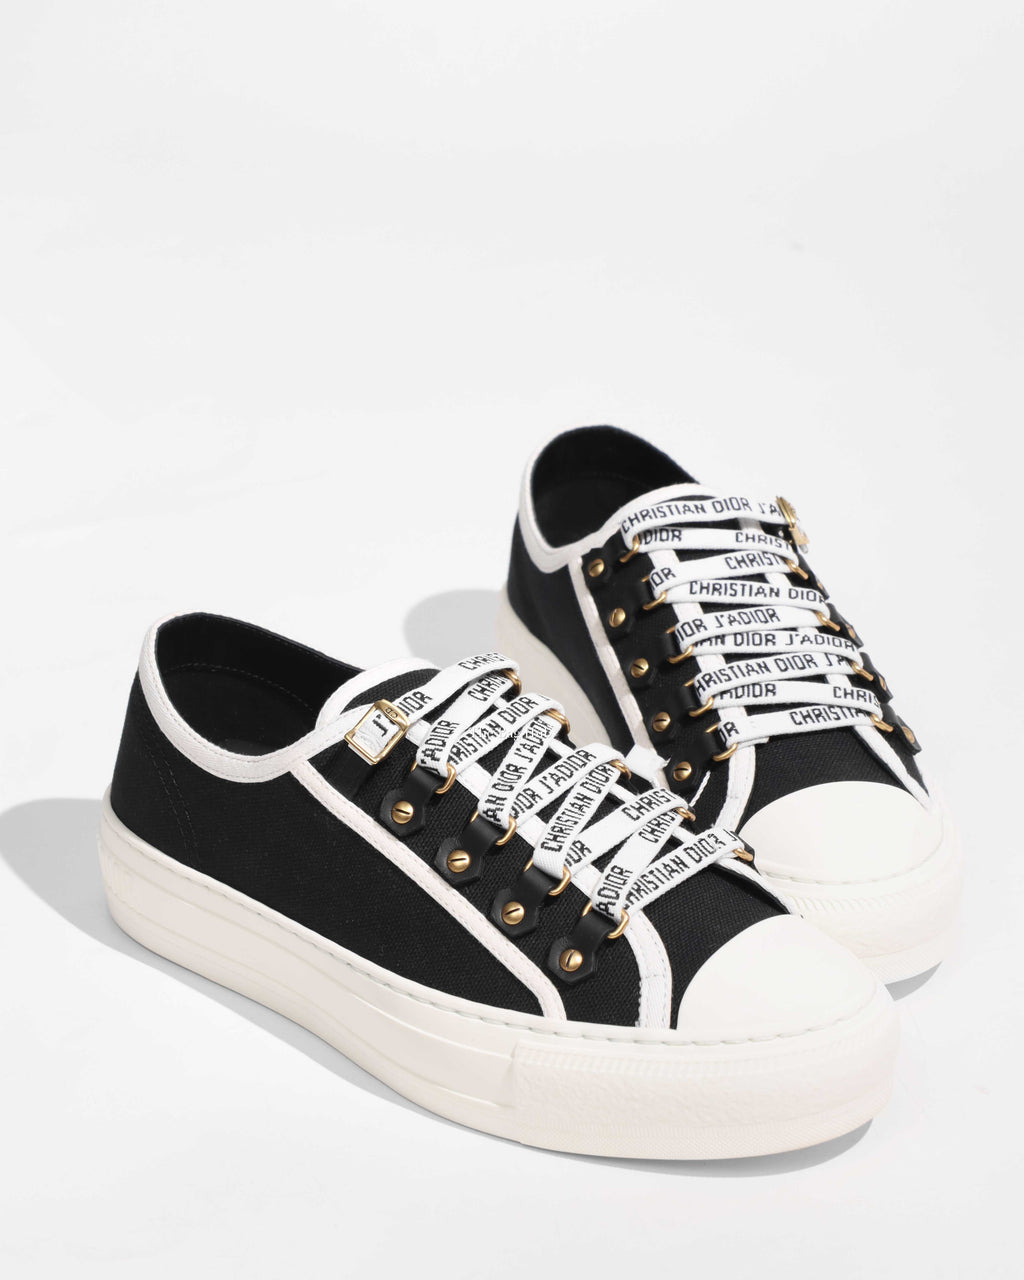 Christian Dior Black/White Canvas Dot Walk'N'Dior Low Top Sneakers Size 36